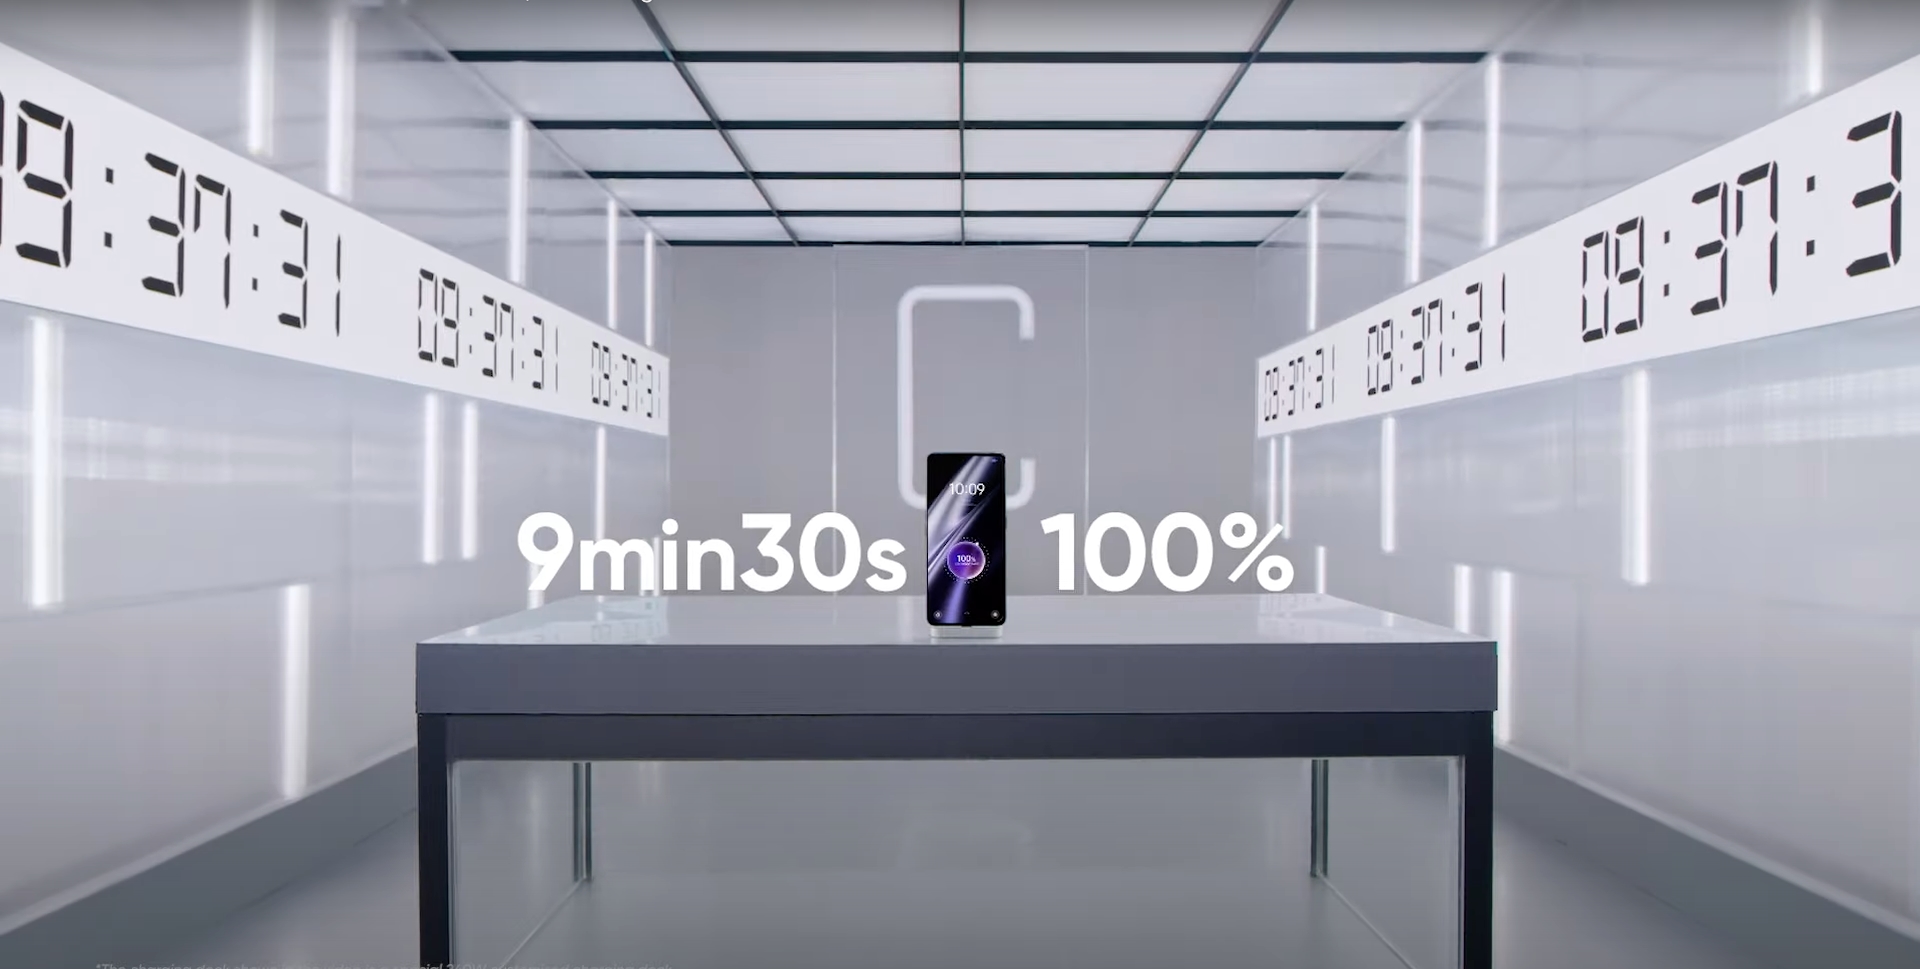 From 0 to 100% in less than 10 minutes: realme demonstrates how the SuperVOOC 240W fast charger works on the realme GT 3 smartphone